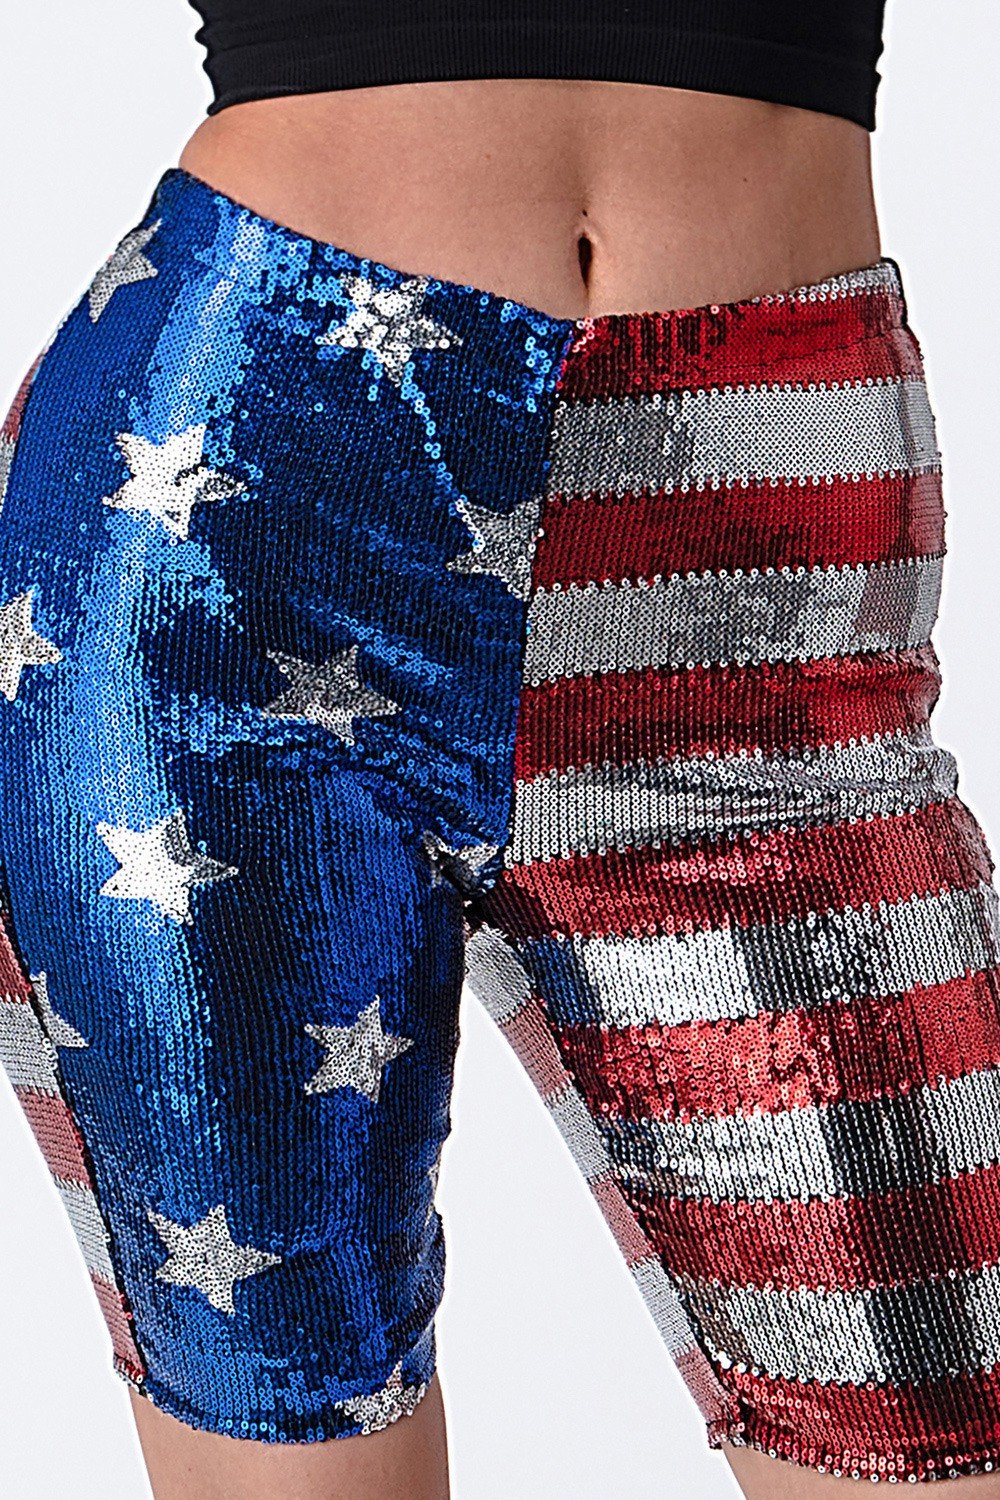 America Flag Printed Sequins Biker Shorts - MY SEXY STYLES